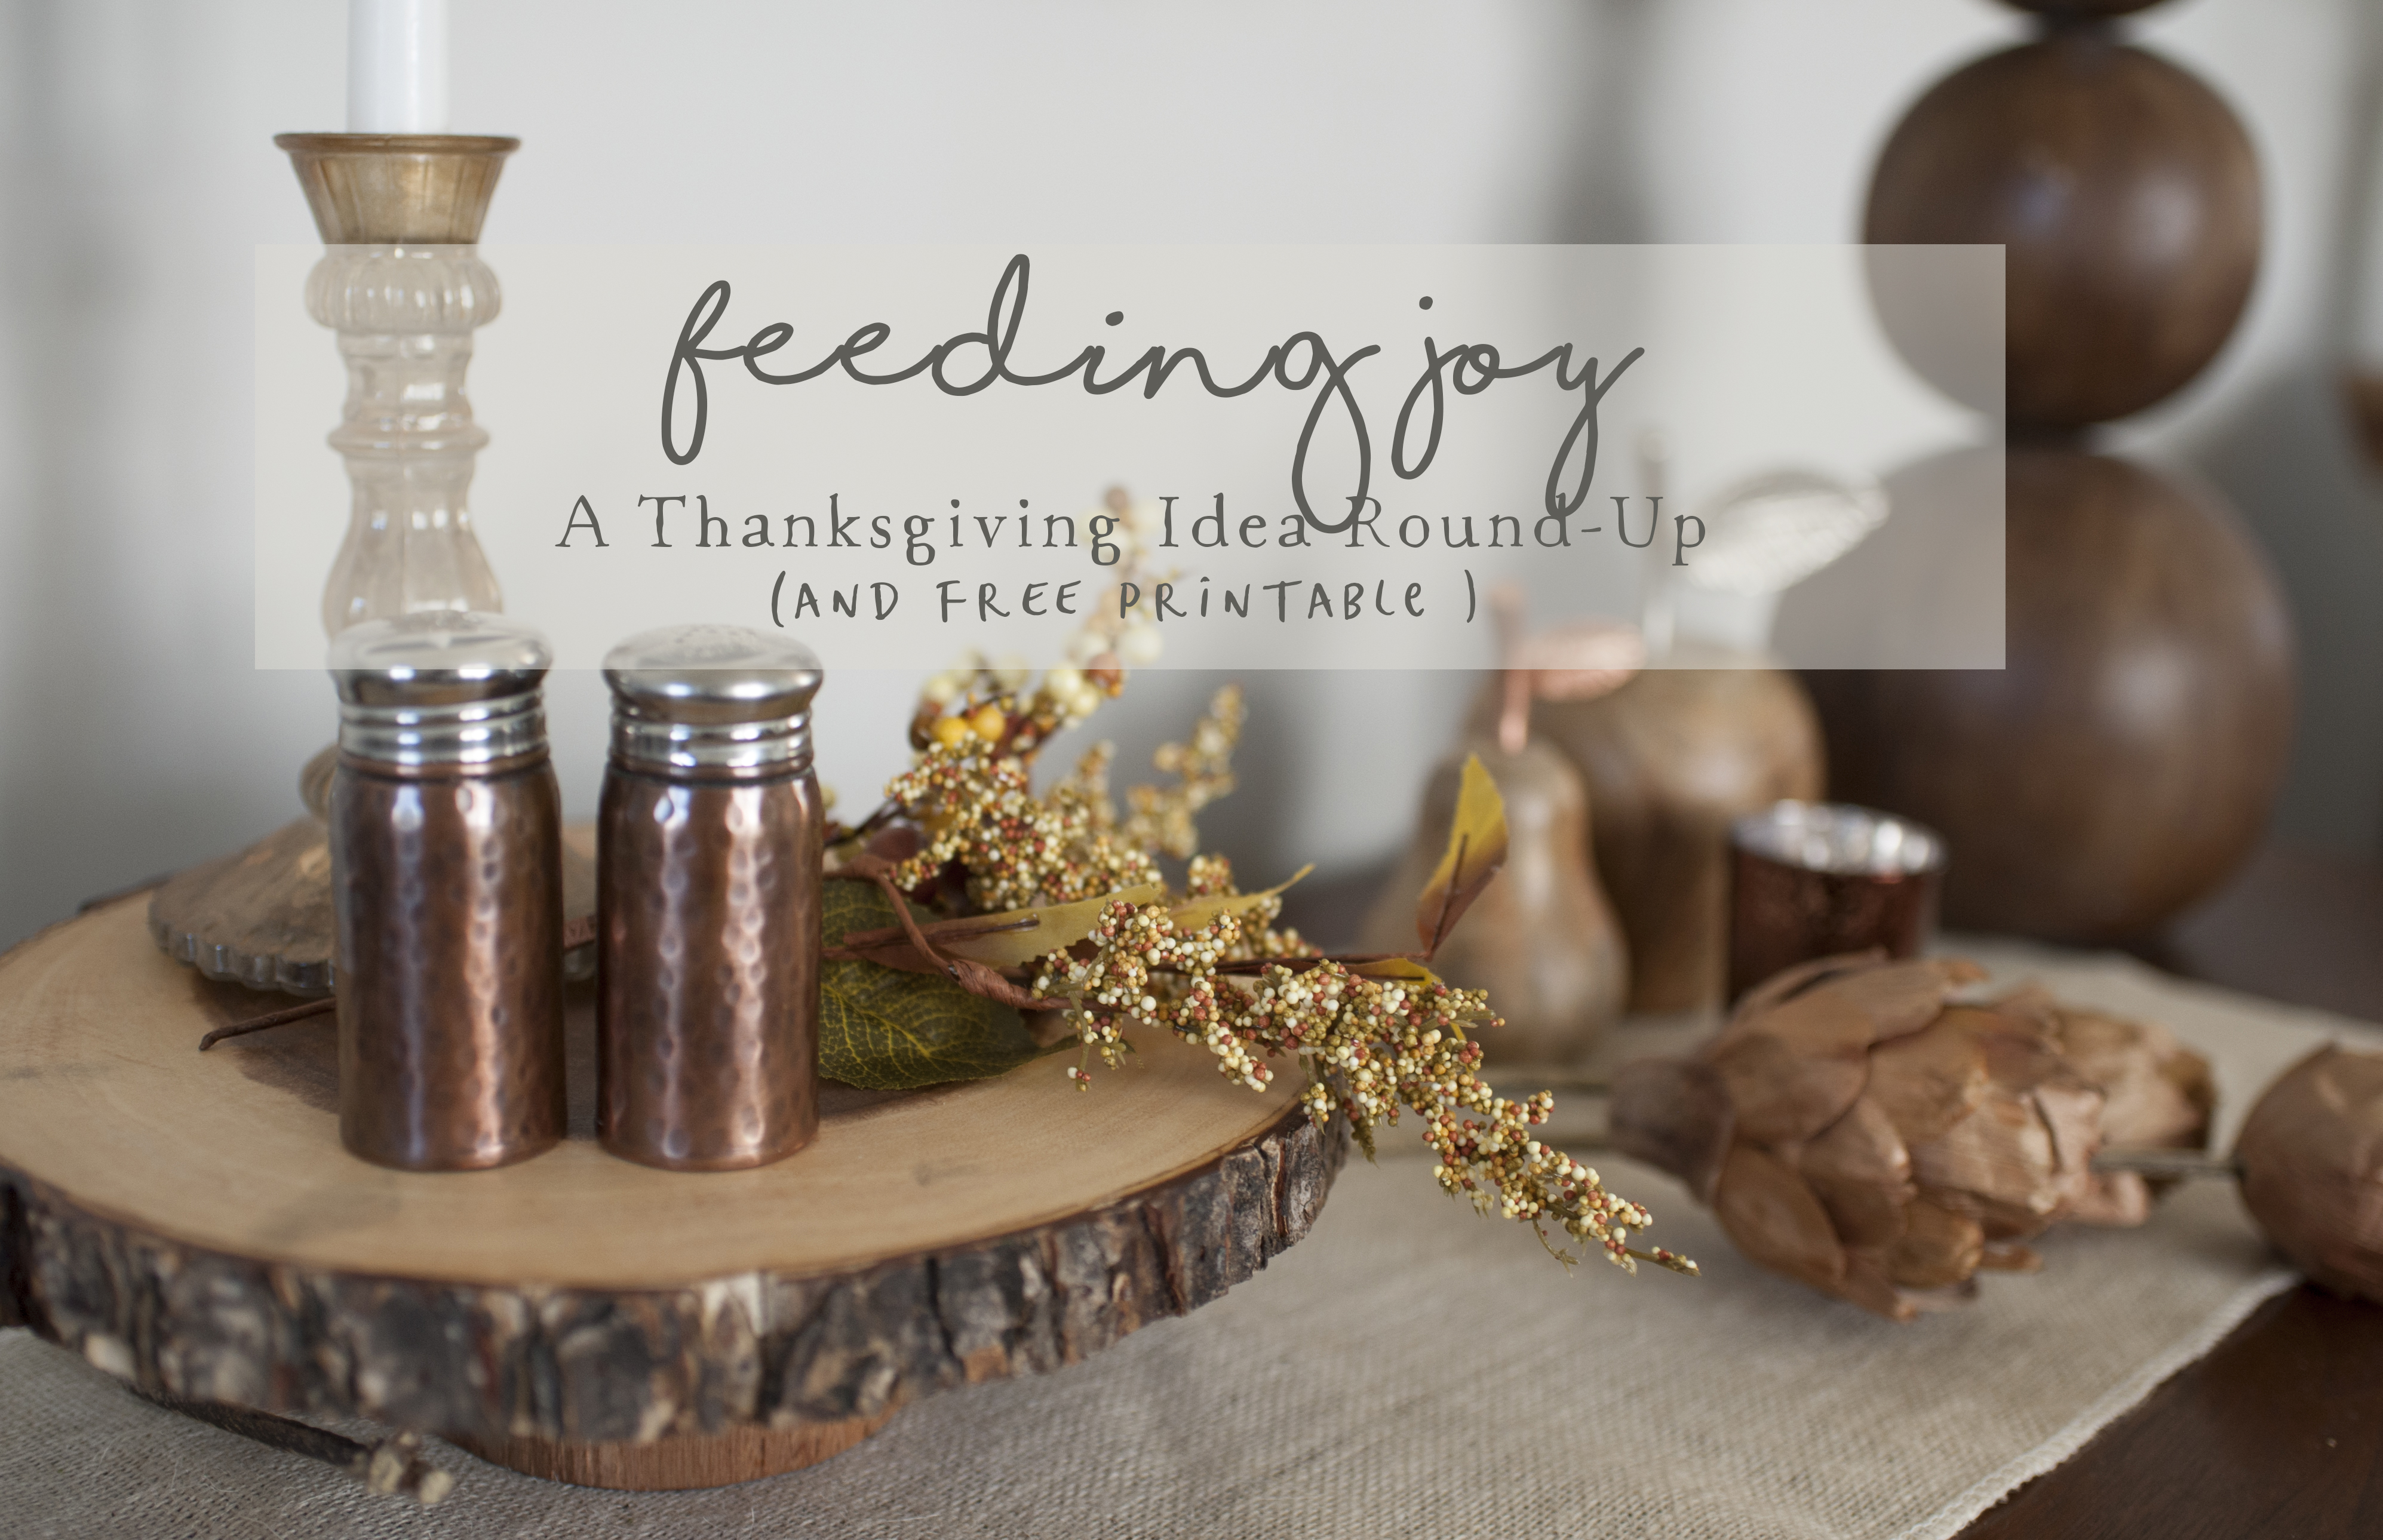 Thanksgiving table ideas round-up